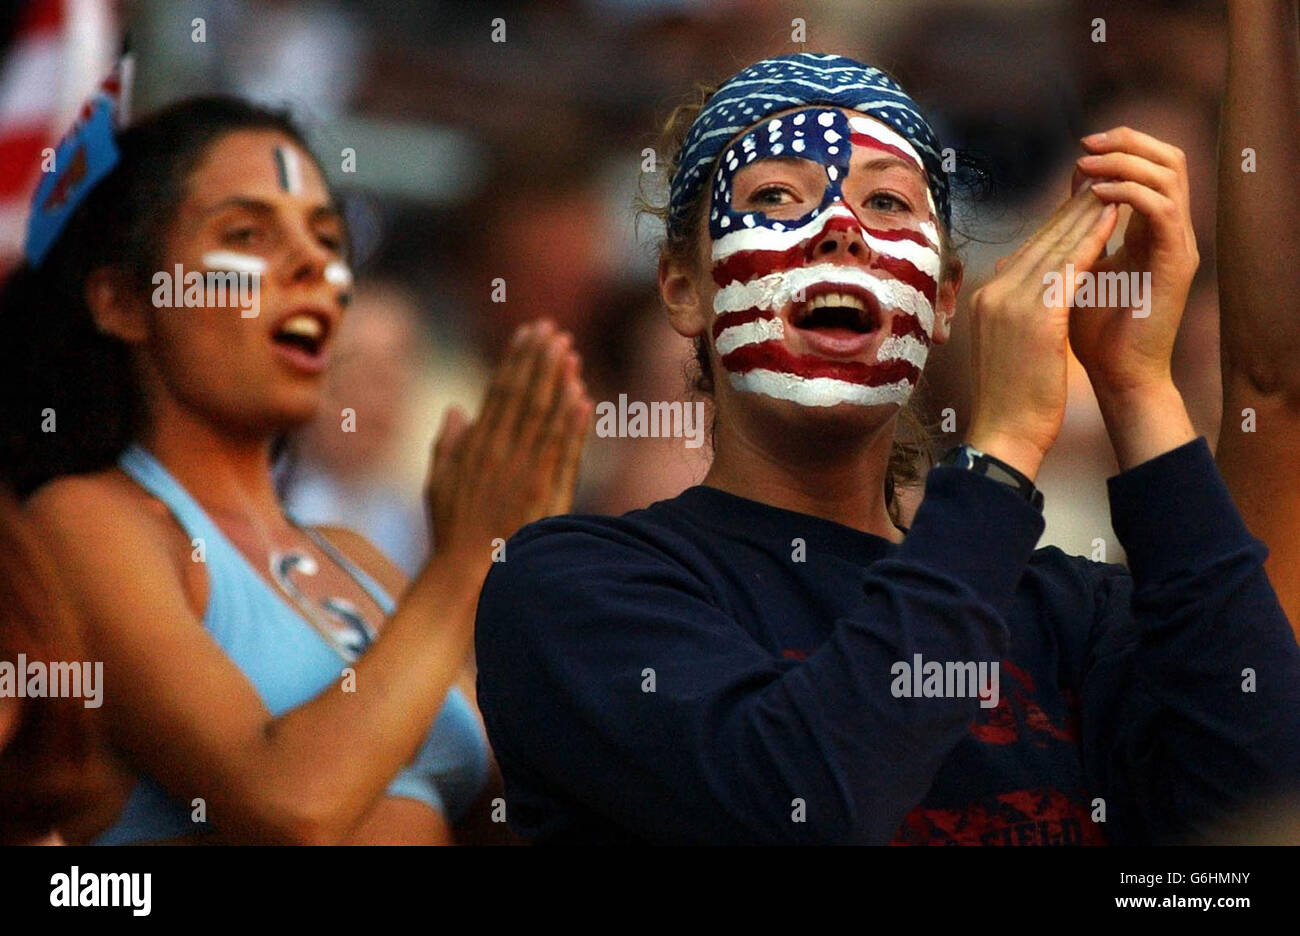 A USA fan stands in front of a Fiji fan, during their Rugby World Cup game in the Suncorp Stadium, Brisbane, Australia. NO MOBILE PHONE USE. INTERNET SITES MAY ONLY USE ONE IMAGE EVERY FIVE MINUTES DURING THE MATCH Stock Photo